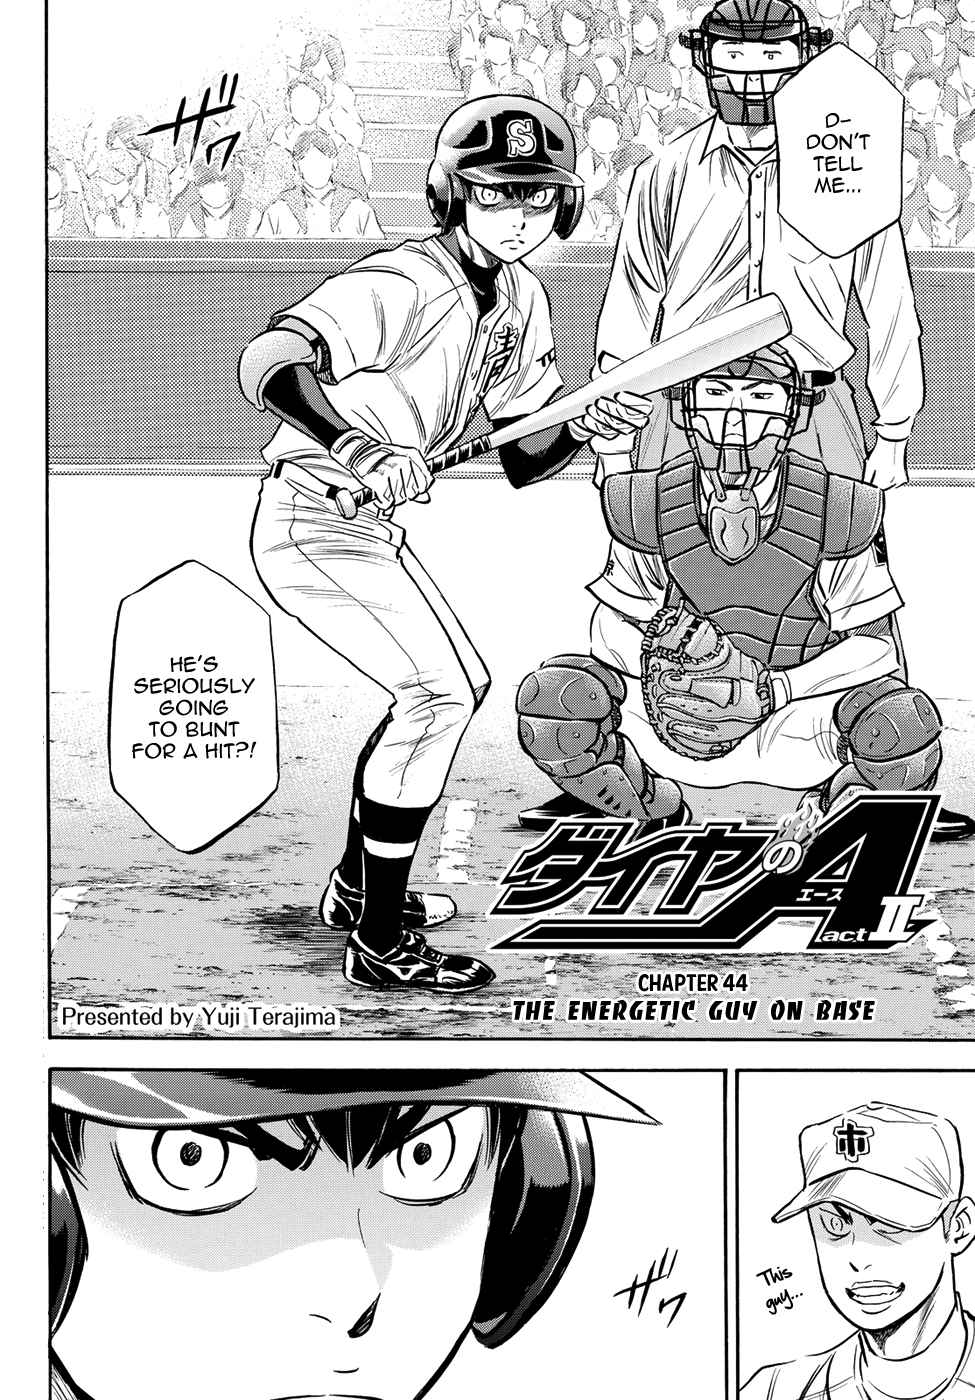 Diamond no Ace Act II Vol. 5 Ch. 44 The Energetic Guy on Base